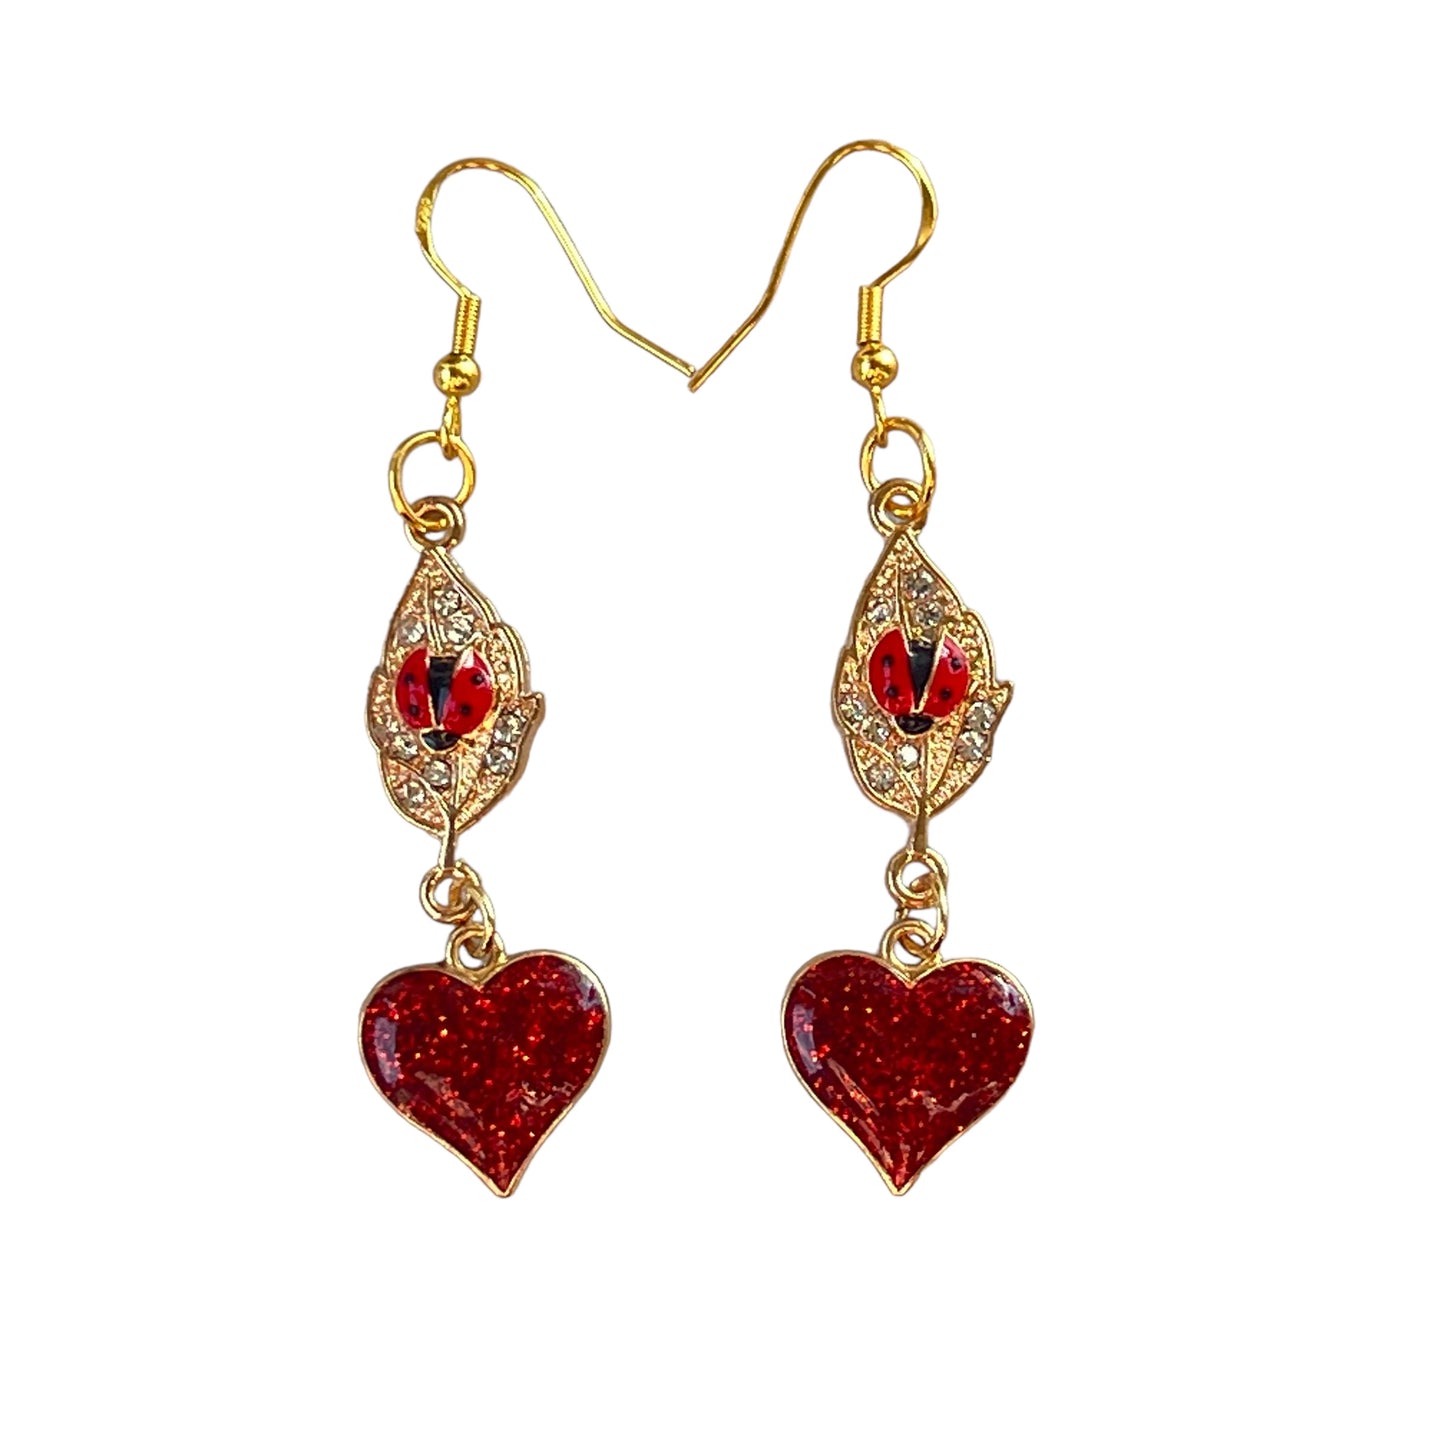 Gold Leaf with Ladybug & Red Heart Dangle Earrings: Whimsical Nature-inspired Jewelry